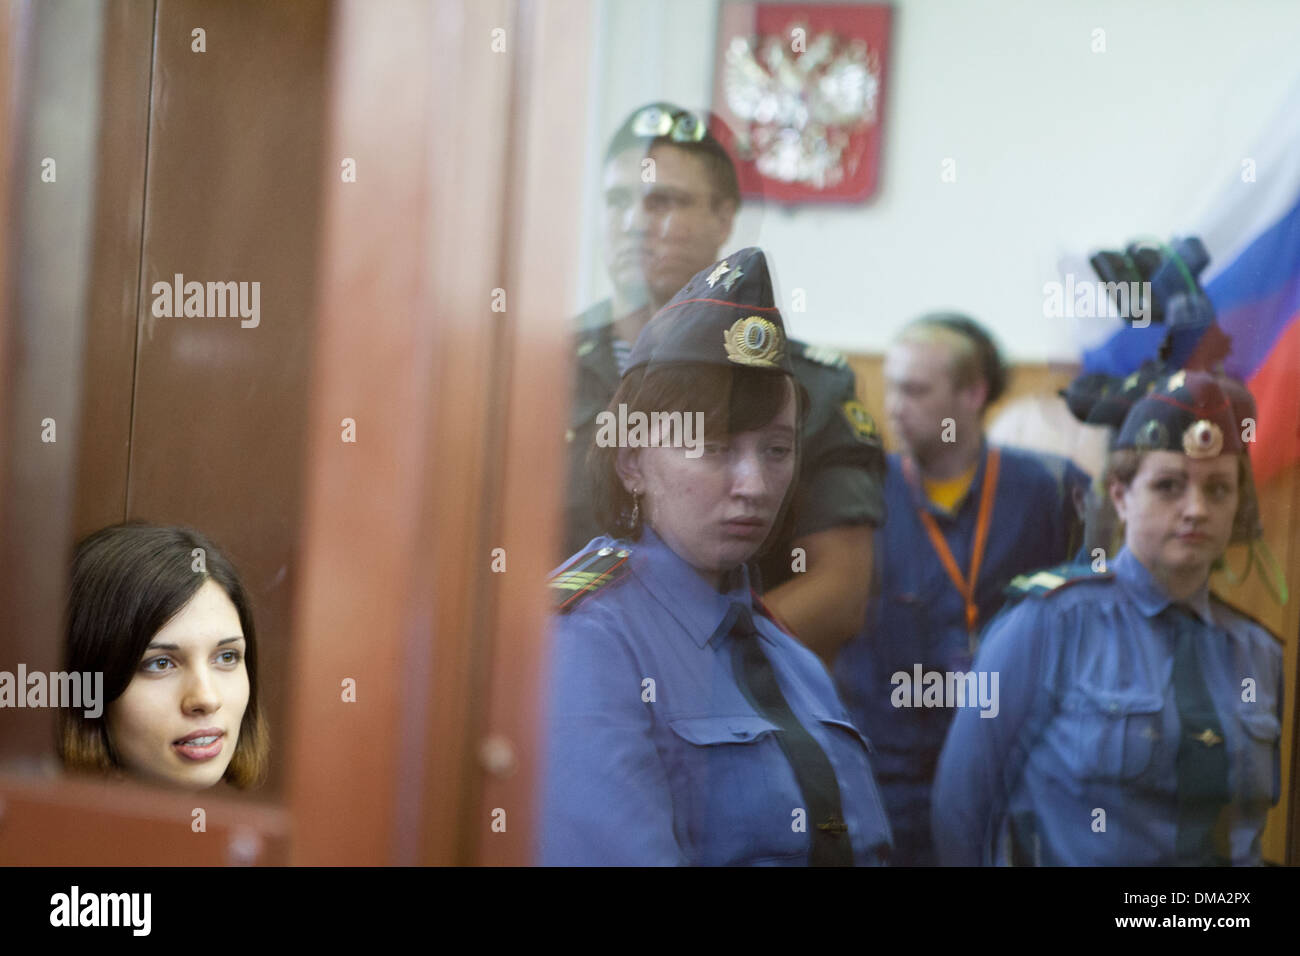 Three Members Of Russian Punk Band Pussy Riot Have Been Jailed Two Years After A Judge Ruled